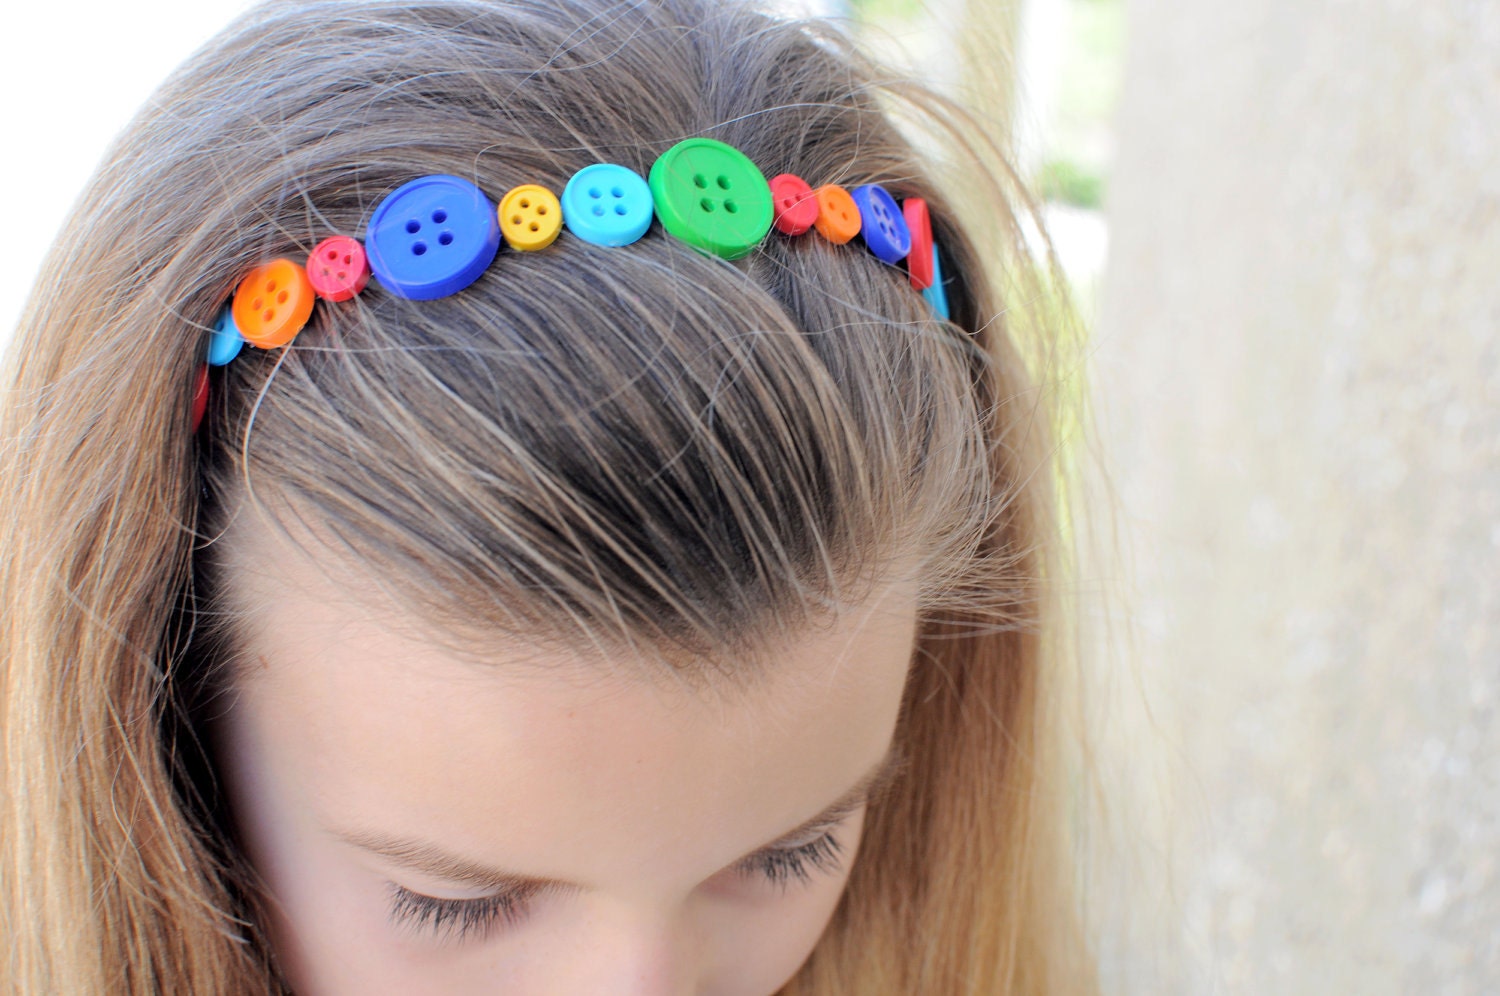 Multi-colored Button Headband, Perfect for Back to School - LittleCajunBowtique